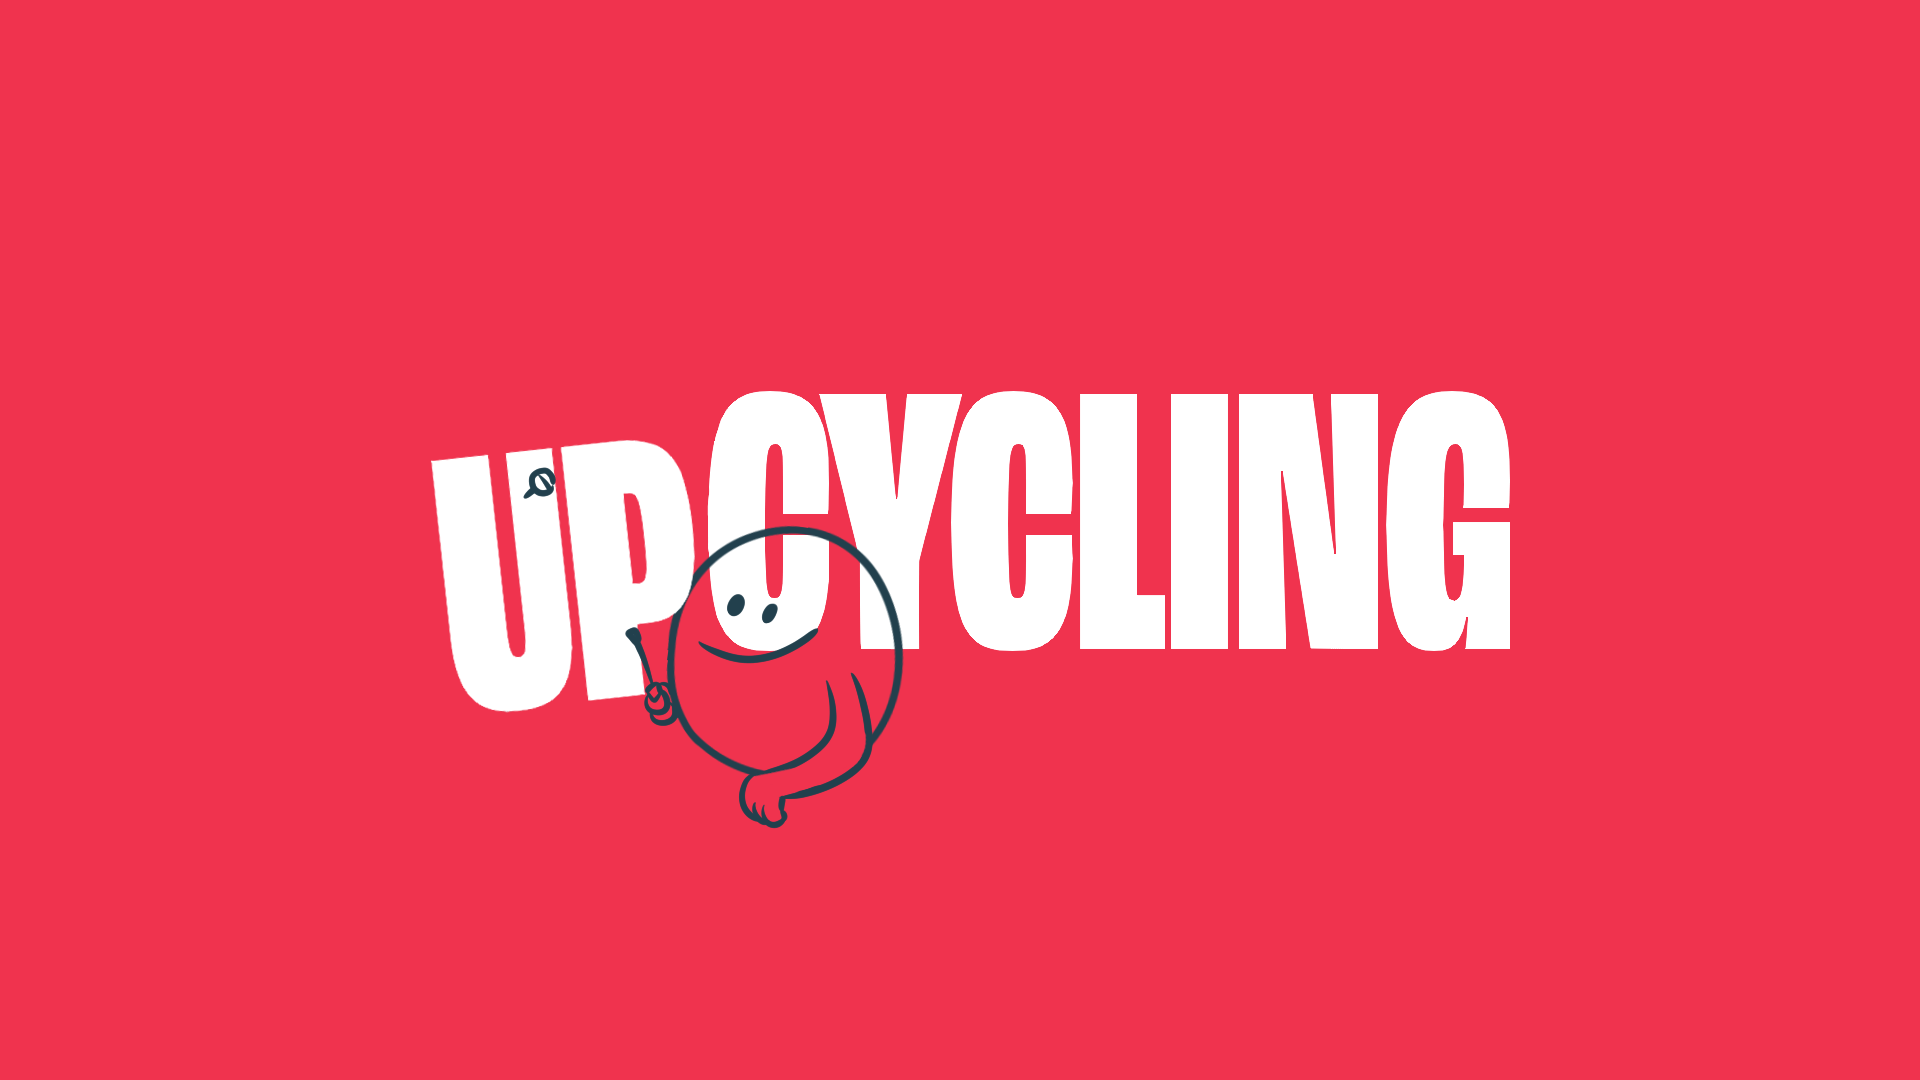 upcycling-1